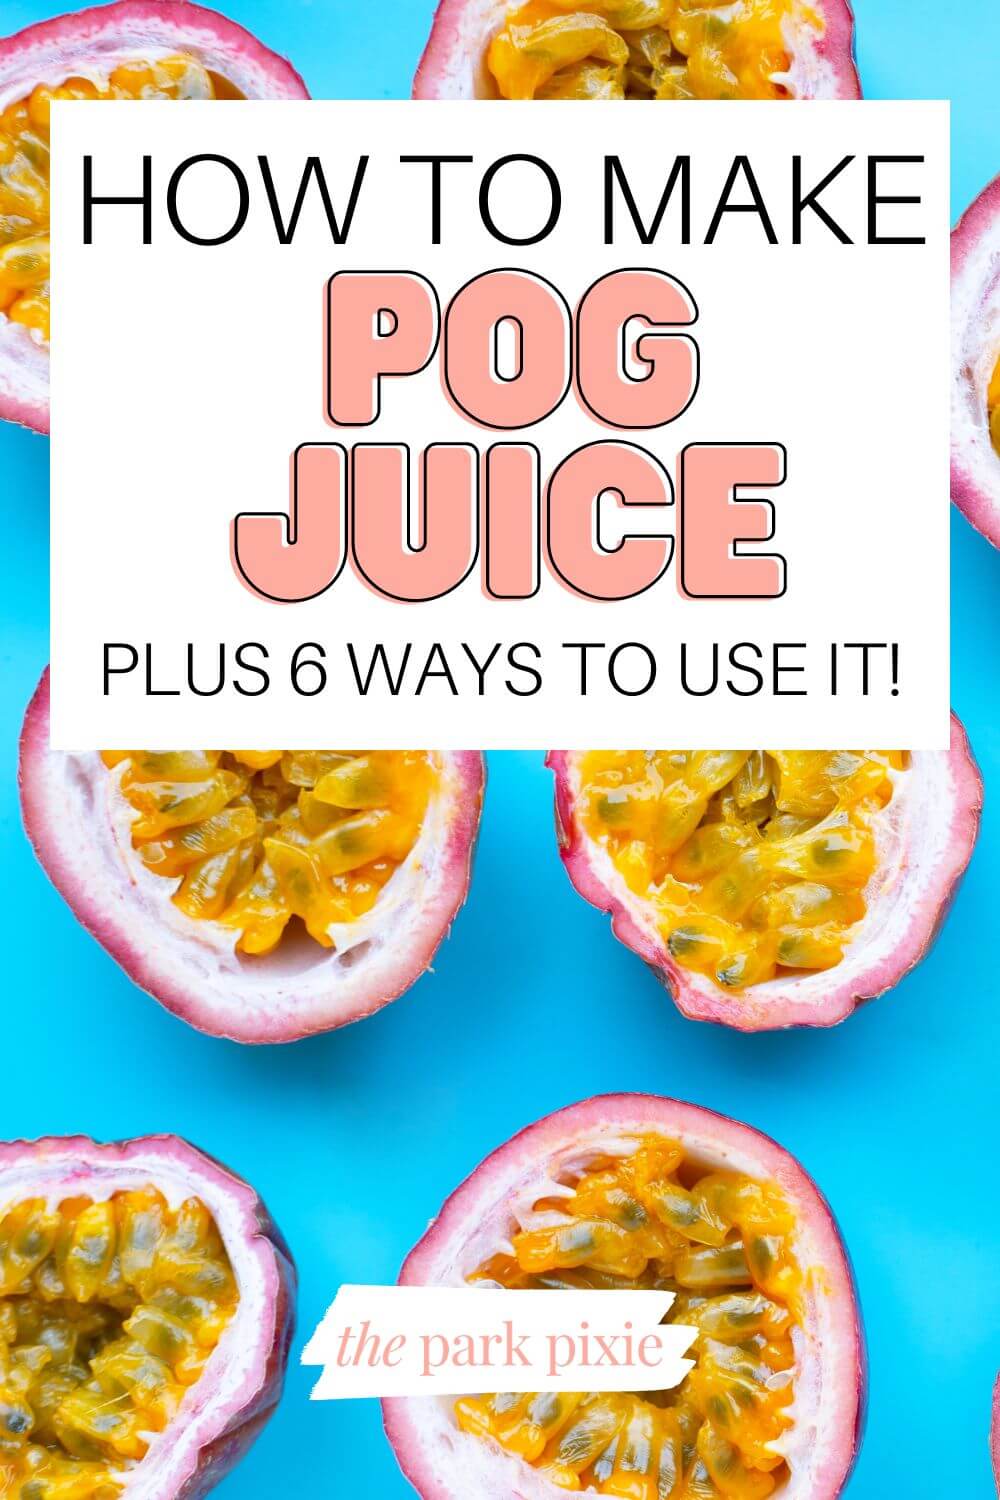 Photo of cut open passion fruit on a bright blue background. Text overlay reads "How to Make POG Juice: Plus 6 Ways to Use It!"